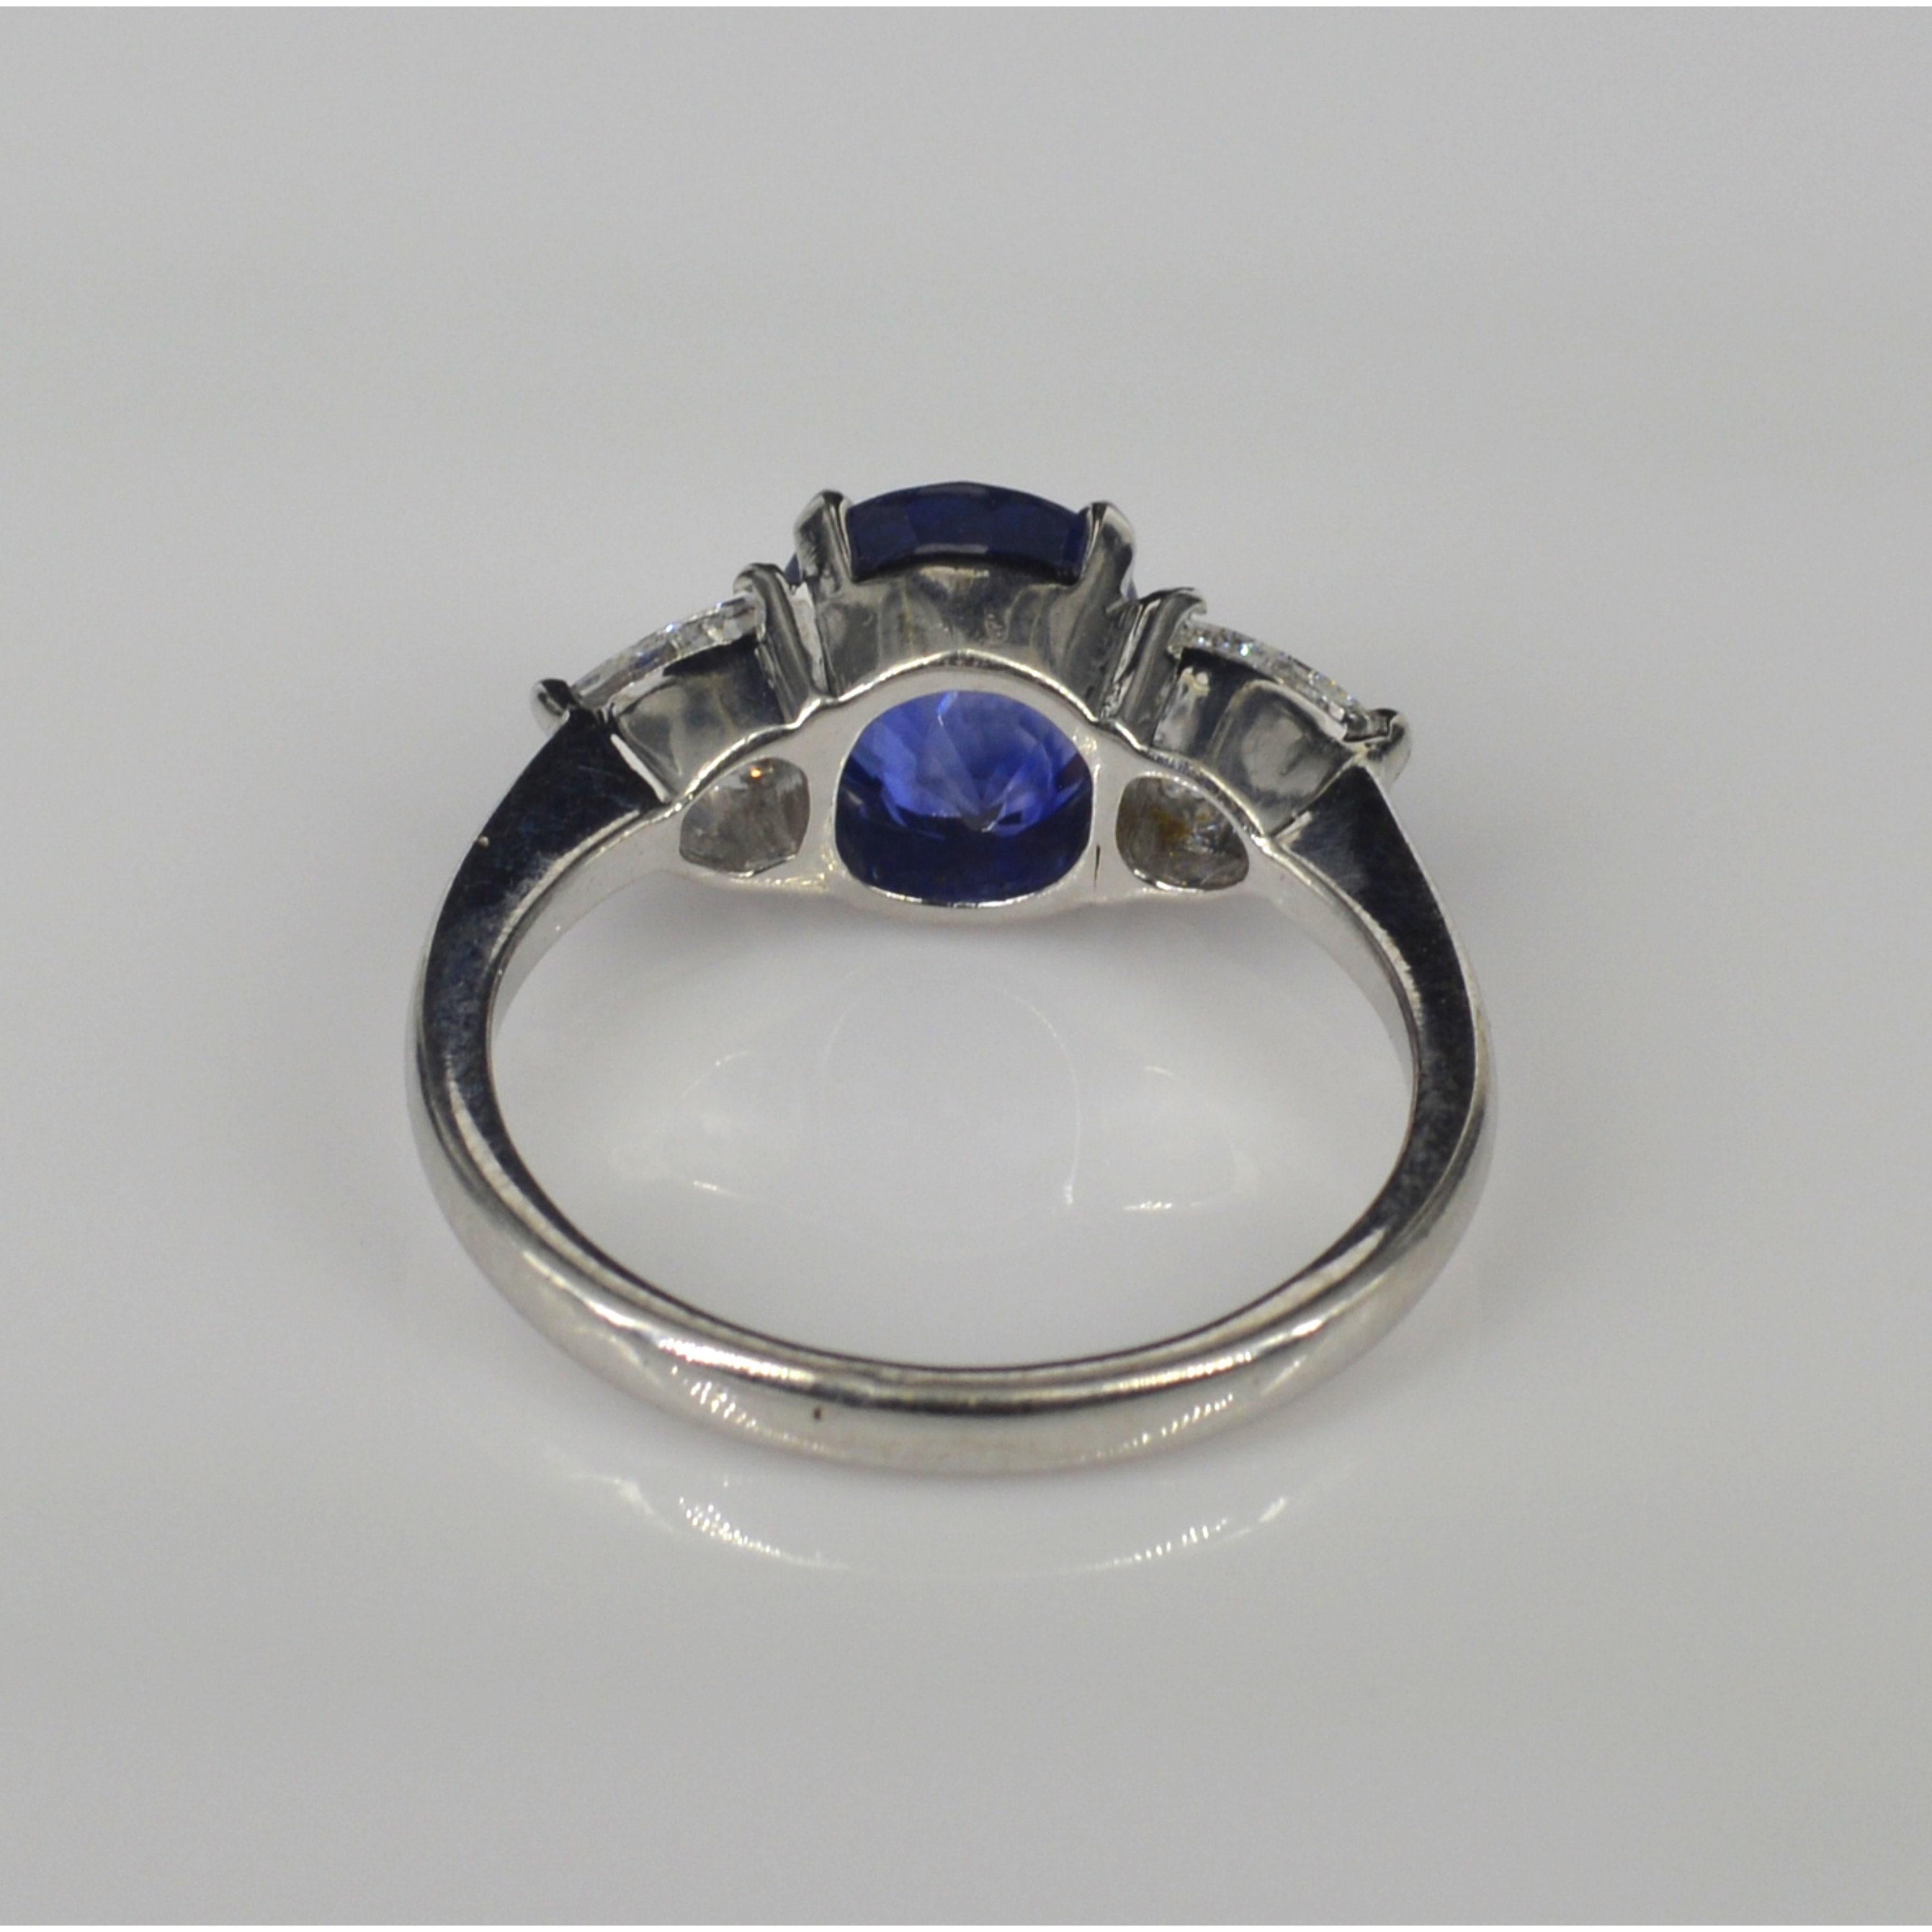 For Sale:  Natural Sapphire Engagement Ring, Vintage Sapphire Wedding Ring 4